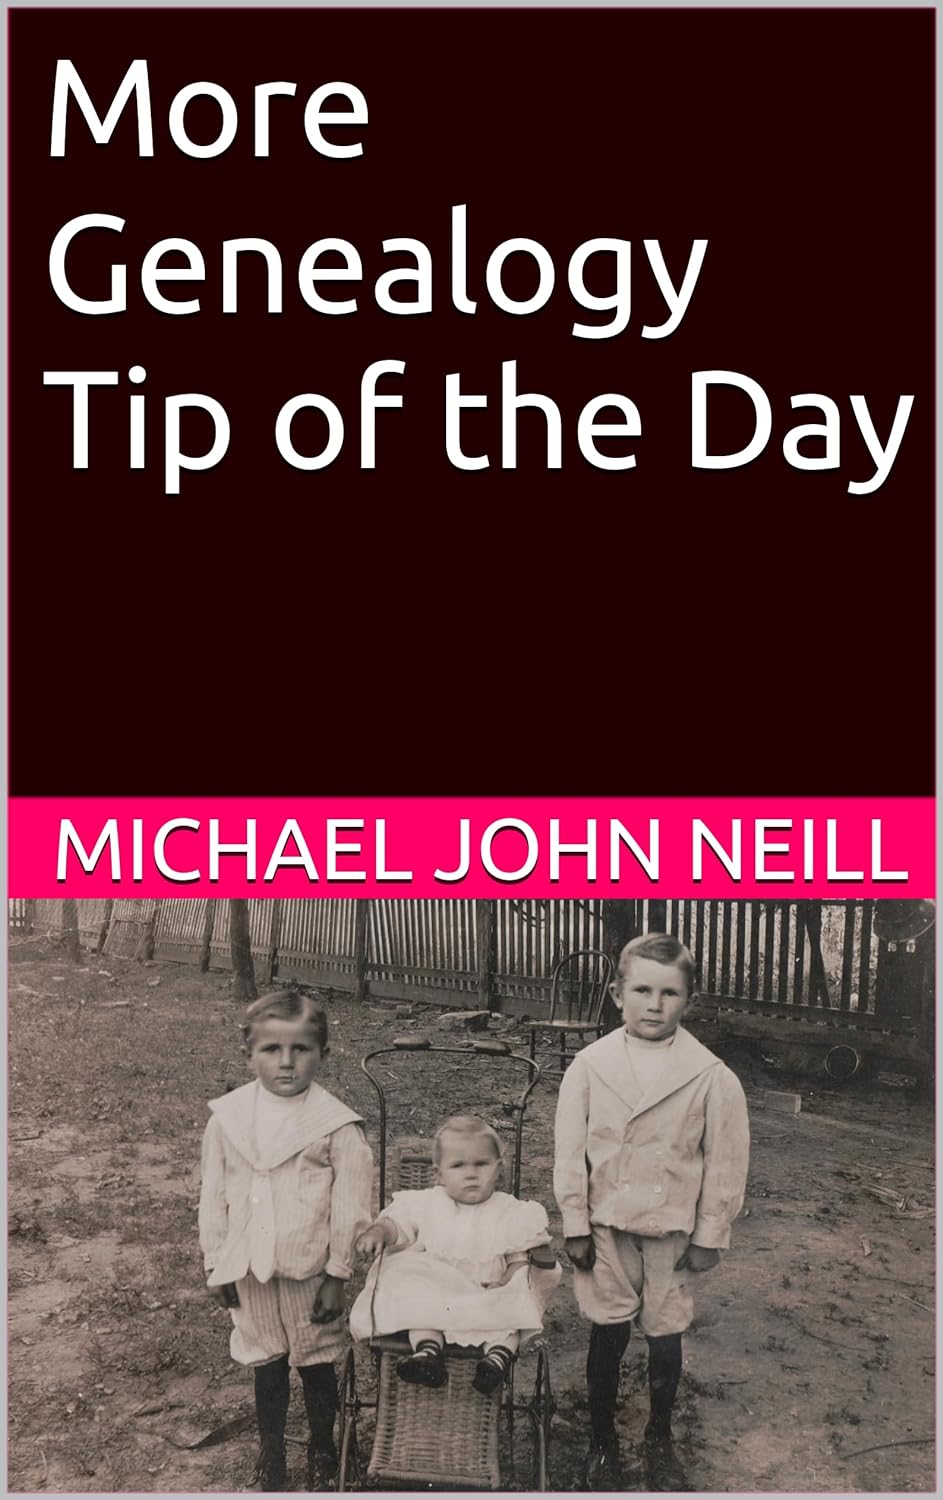 More Genealogy Tip of the Day by Michael John Neill